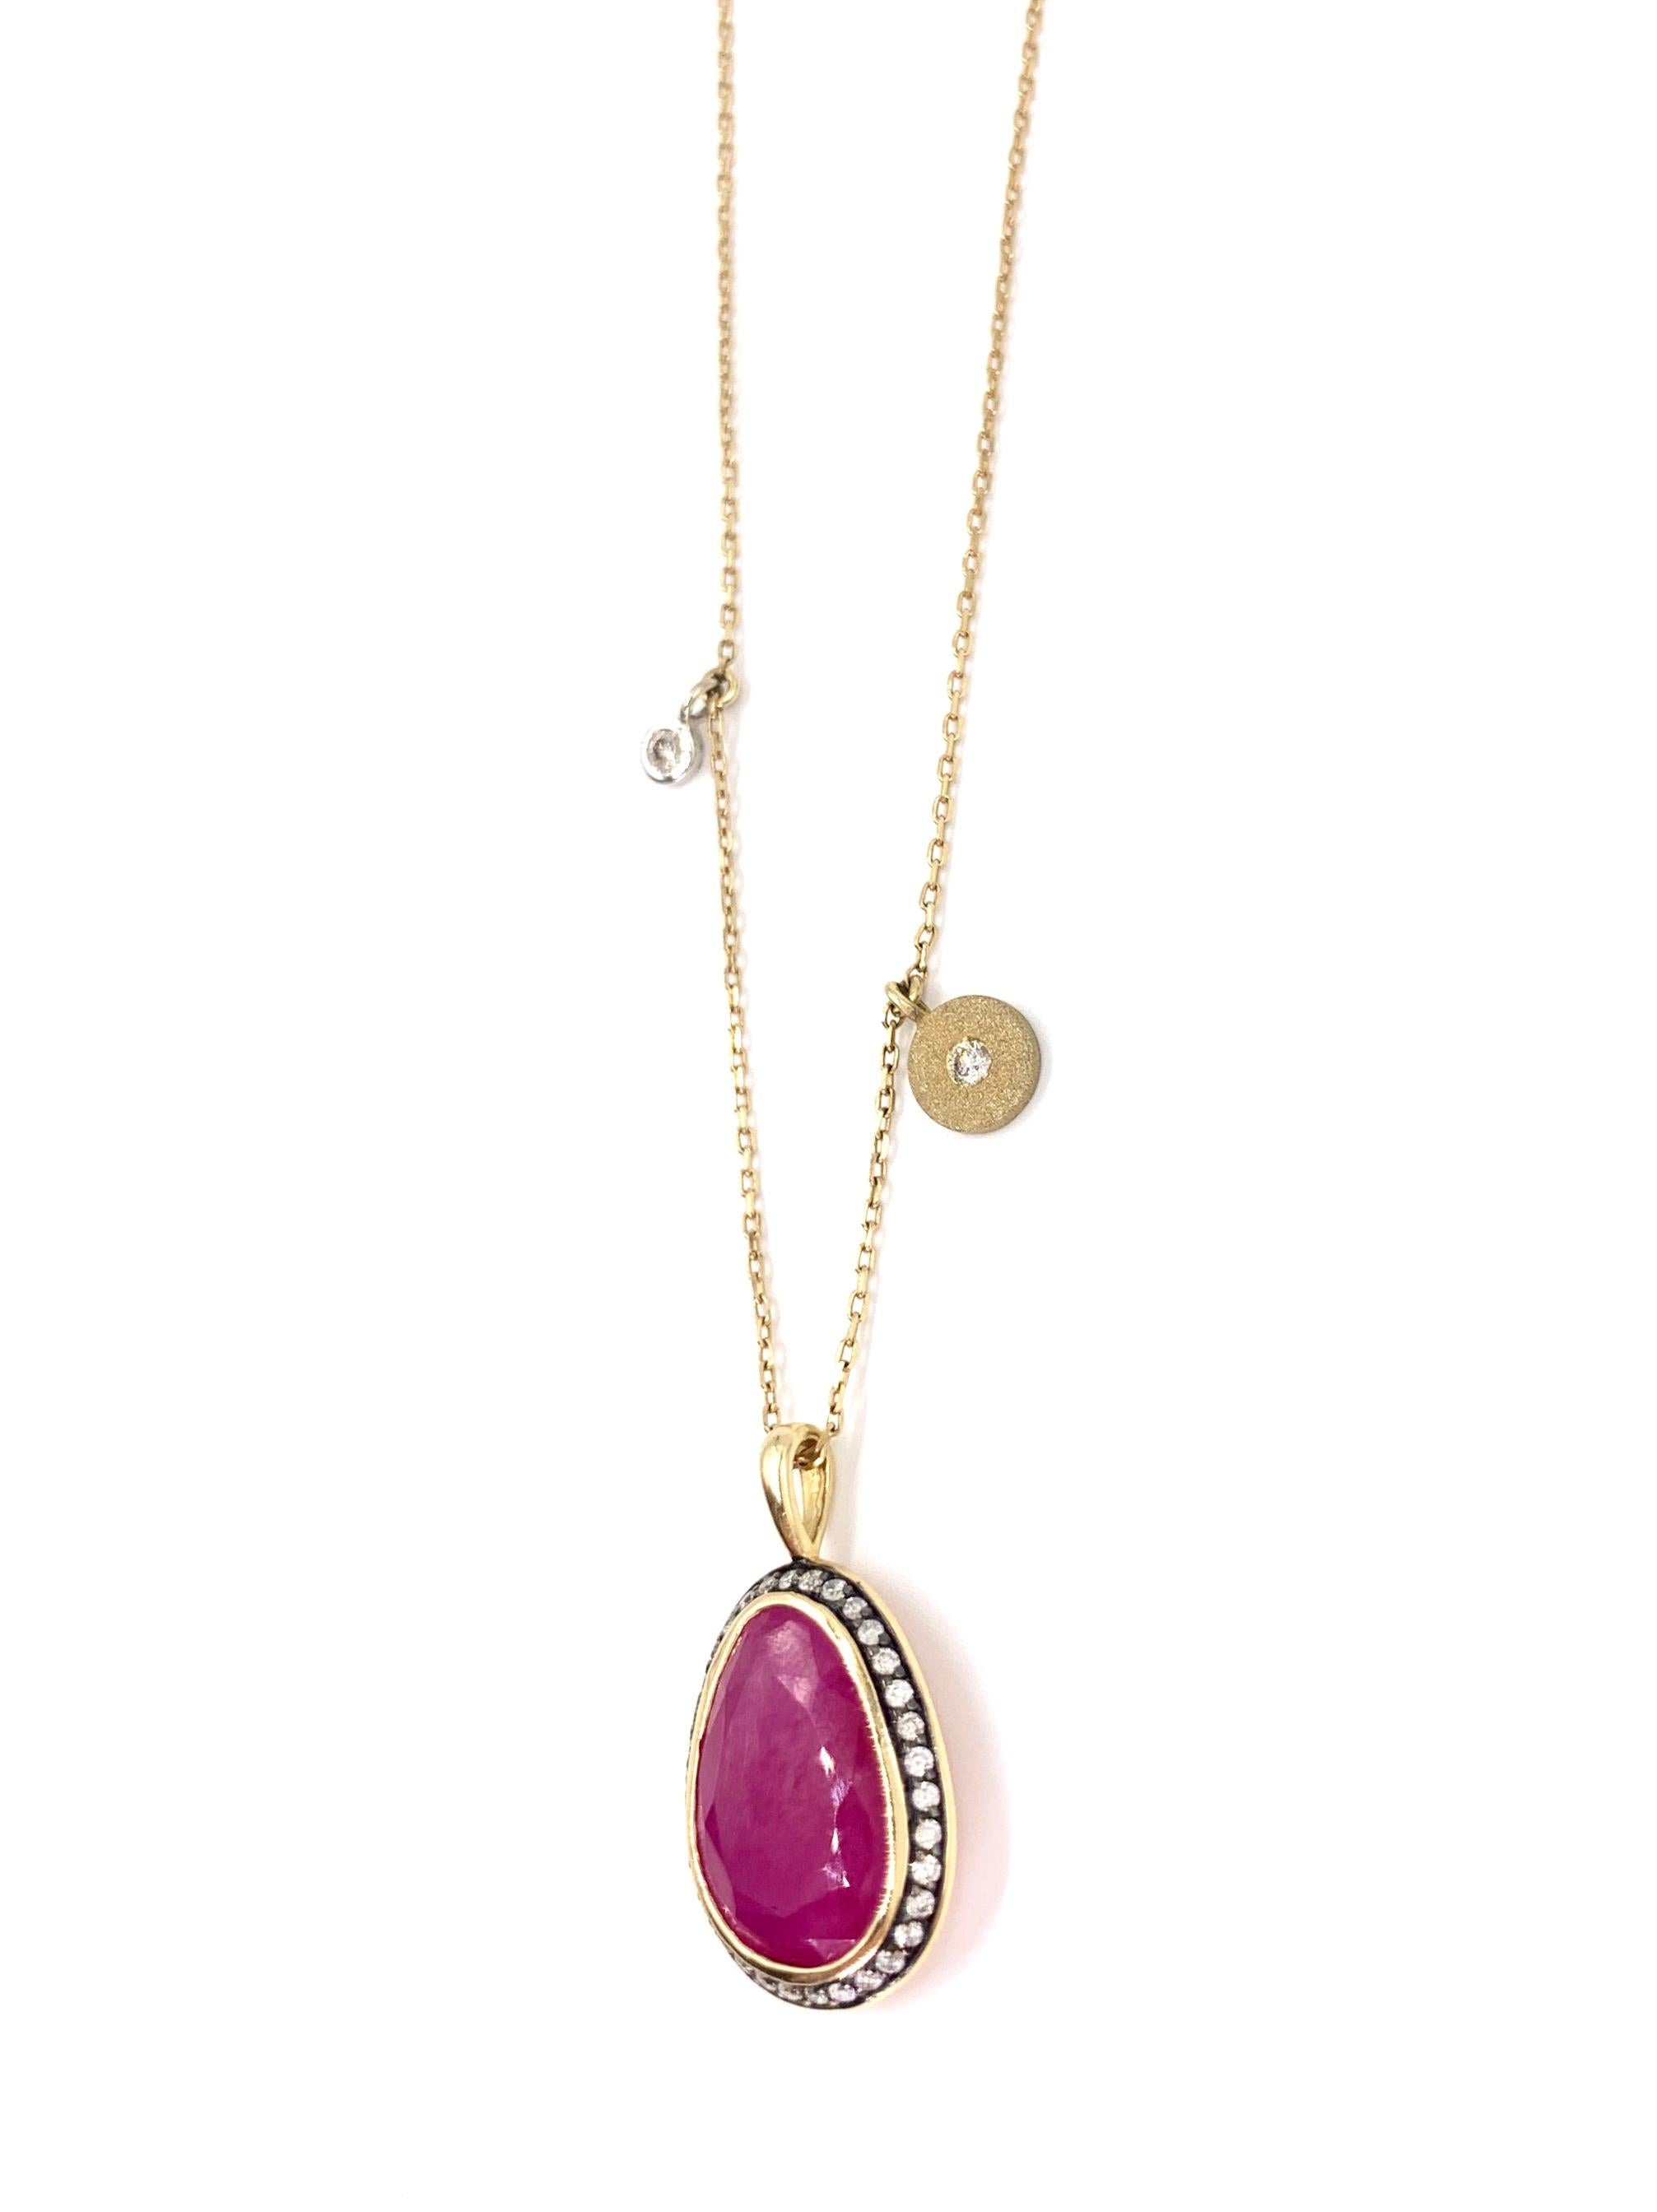 Fashionable and wearable, this 14 karat yellow gold pendant necklace features an organic shaped sliced vivid magenta hue ruby surrounded by white diamonds with two delicate accent diamonds attached to the oval link chain. White round brilliant